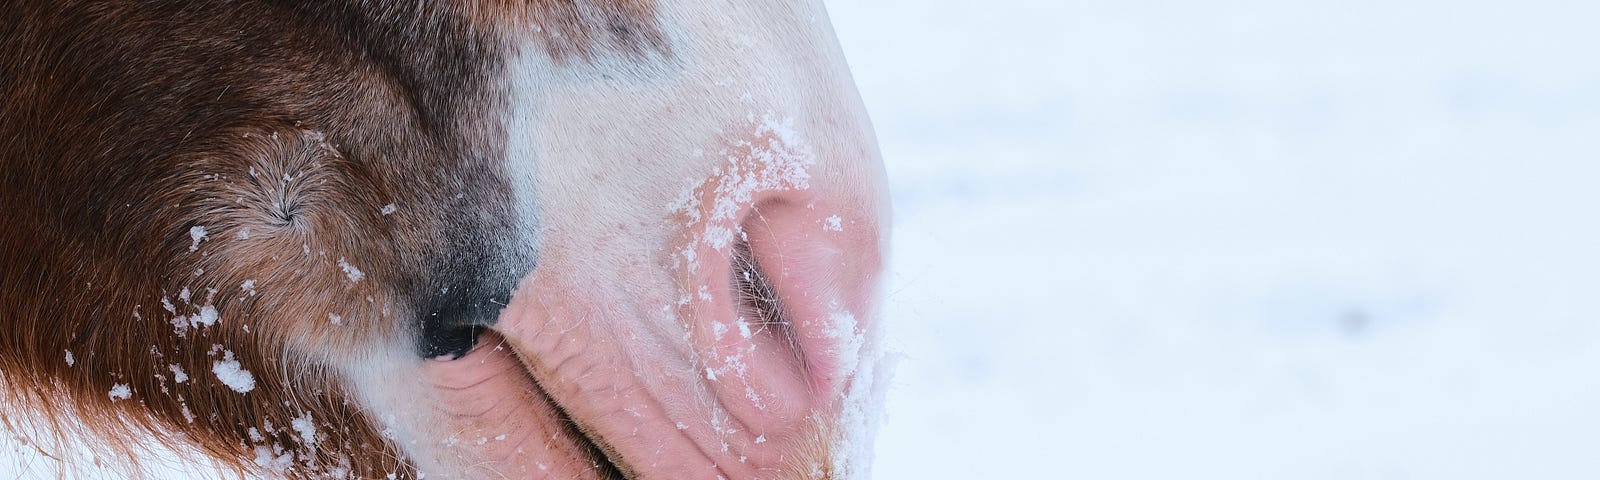 A close up of an animal’s pink nose and mouth, against a snowy white background.